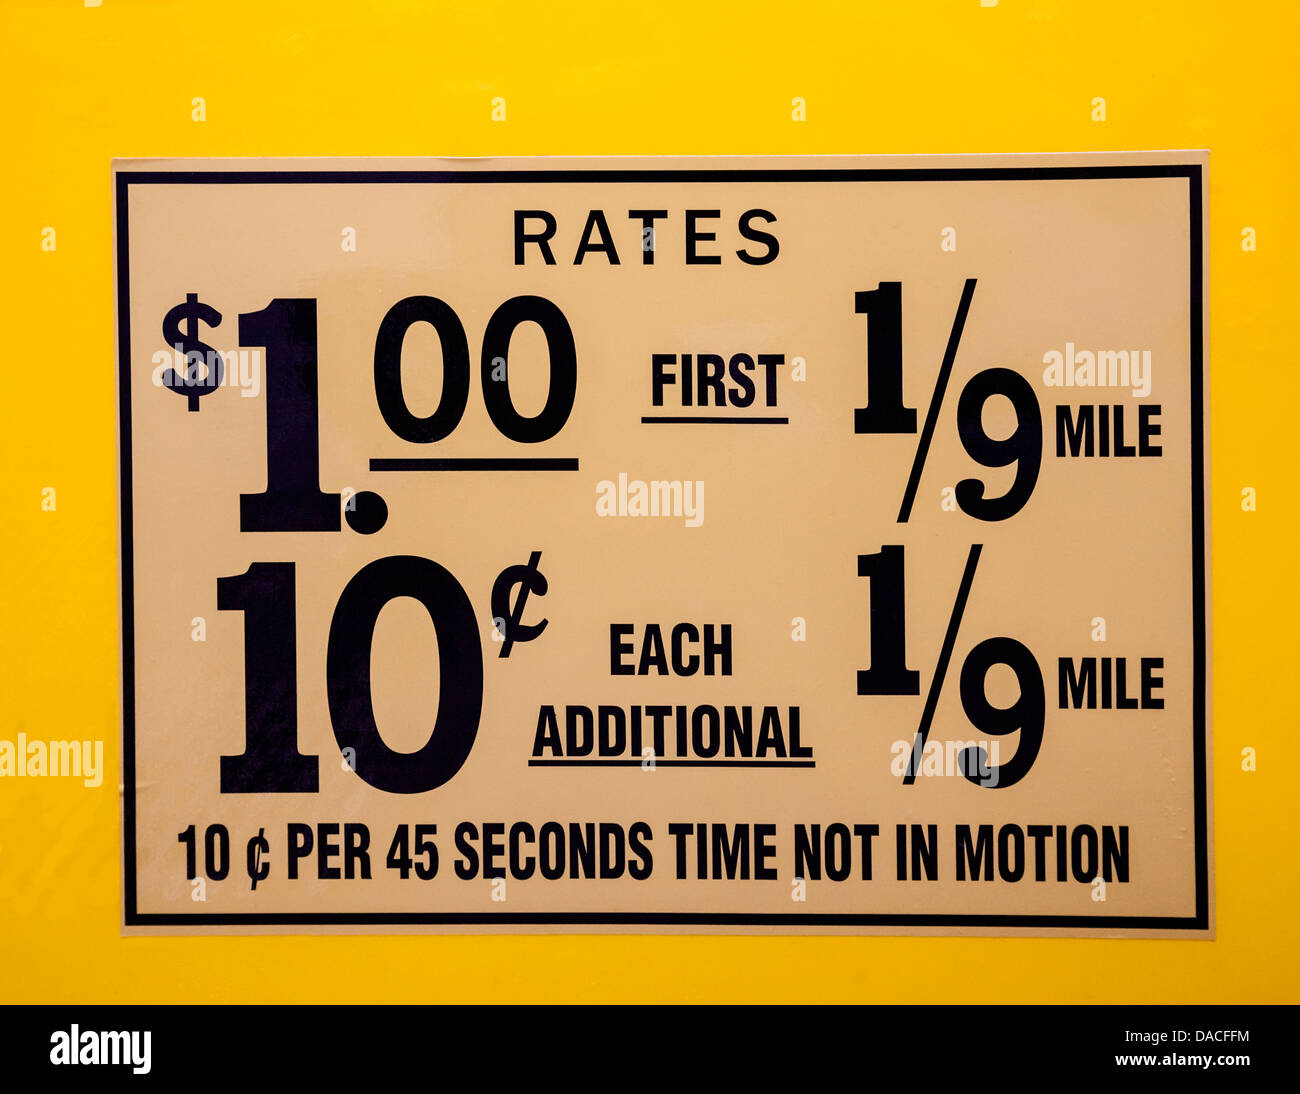 NYC taxi mileage rates displayed on a vintage yellow taxi door, New York City, USA. Stock Photo